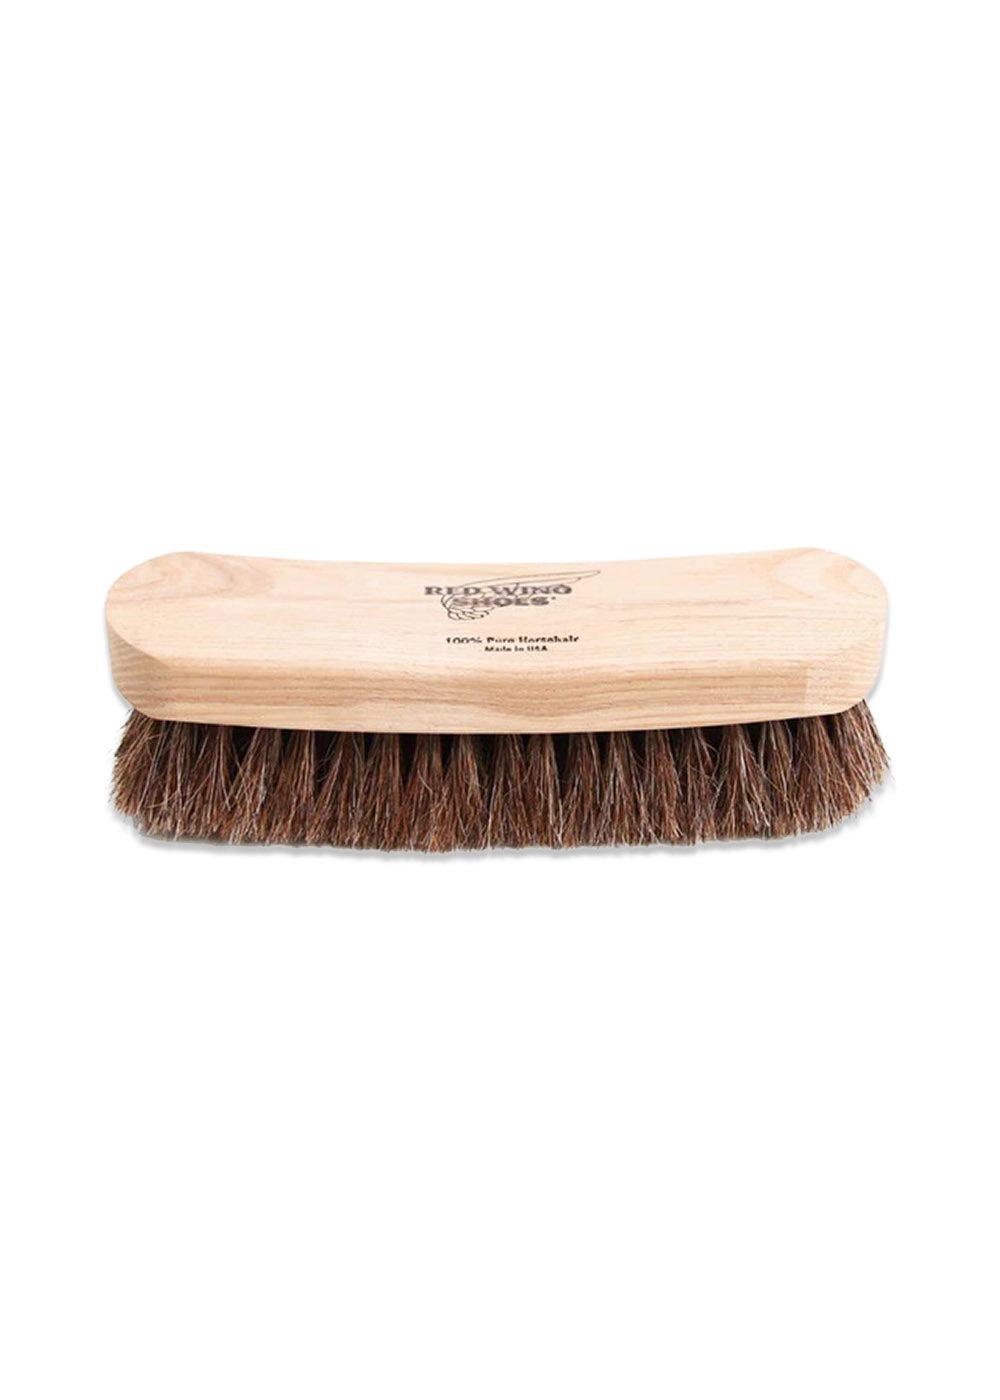 Red Wings Boot Polish Brush - Multi. Køb accessories her.